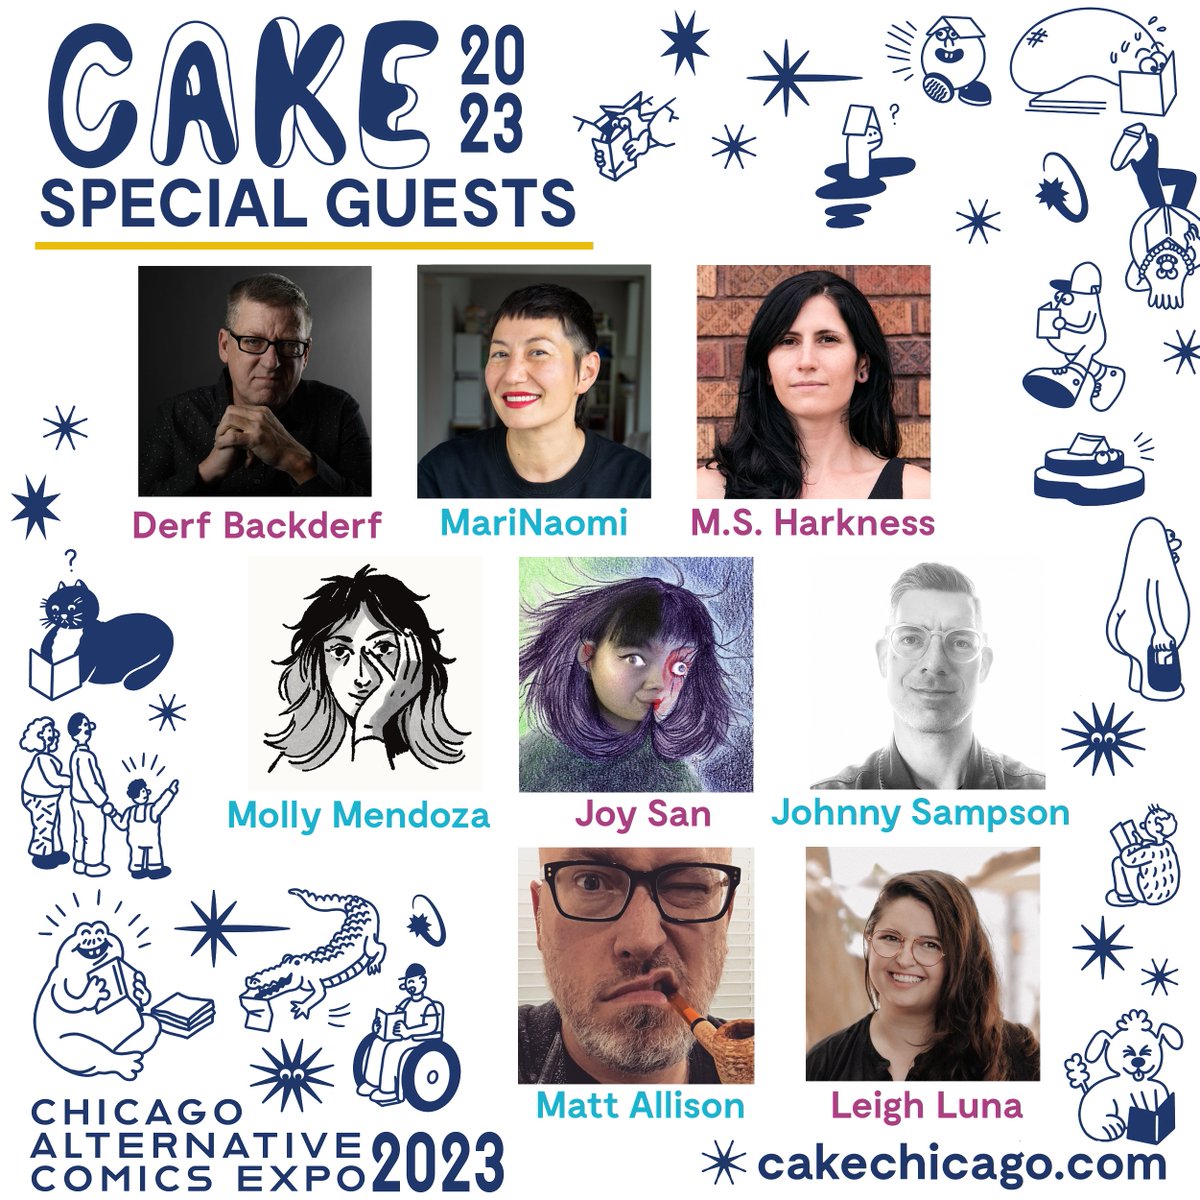 Who is ready for CAKE [airhorn noises] Cause we sure are. We're so excited to host industry titans, new shining stars and Chicago local legends. 🍰Welcome 2023 Special Guests @DerfBackderf @marinaomi @msharkness @thisismollym @sexytuna @johnnysampson @MatthewGAllison & @ourobora